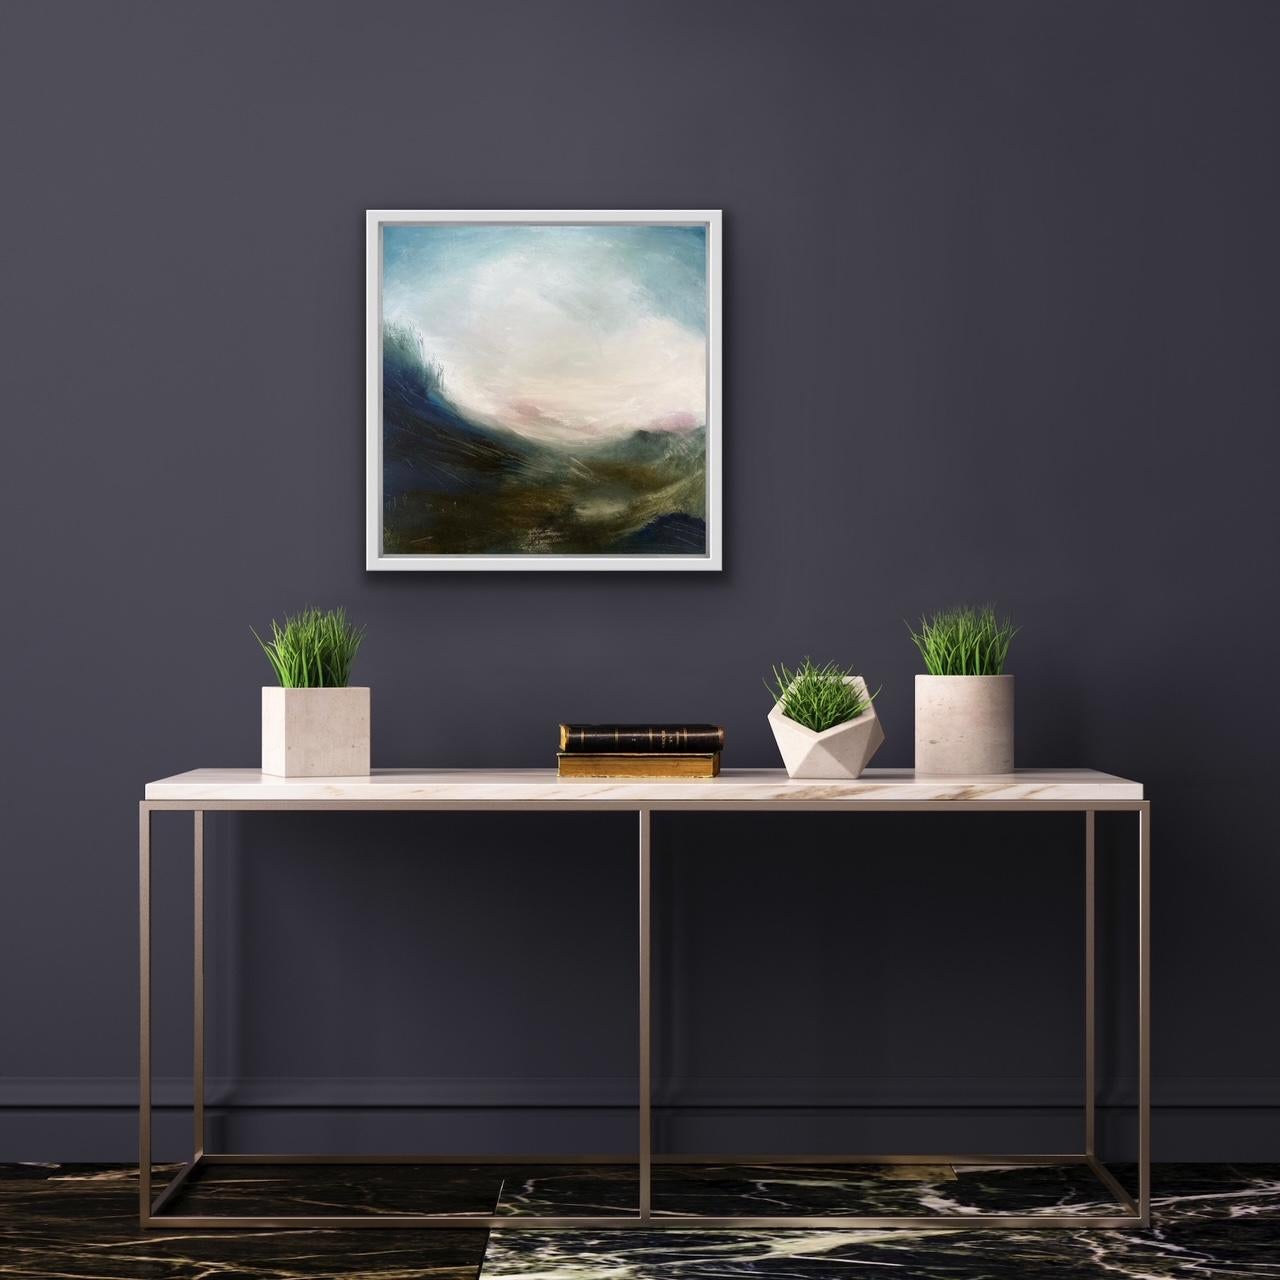 Mountain Mist by Elaine Fox [2022]
original and hand signed by the artist 

Oil Paint on Deep Edge Canvas

Image size: H:50 cm x W:50 cm

Complete Size of Unframed Work: H:50 cm x W:50 cm x D:4cm

Sold Unframed

Please note that insitu images are